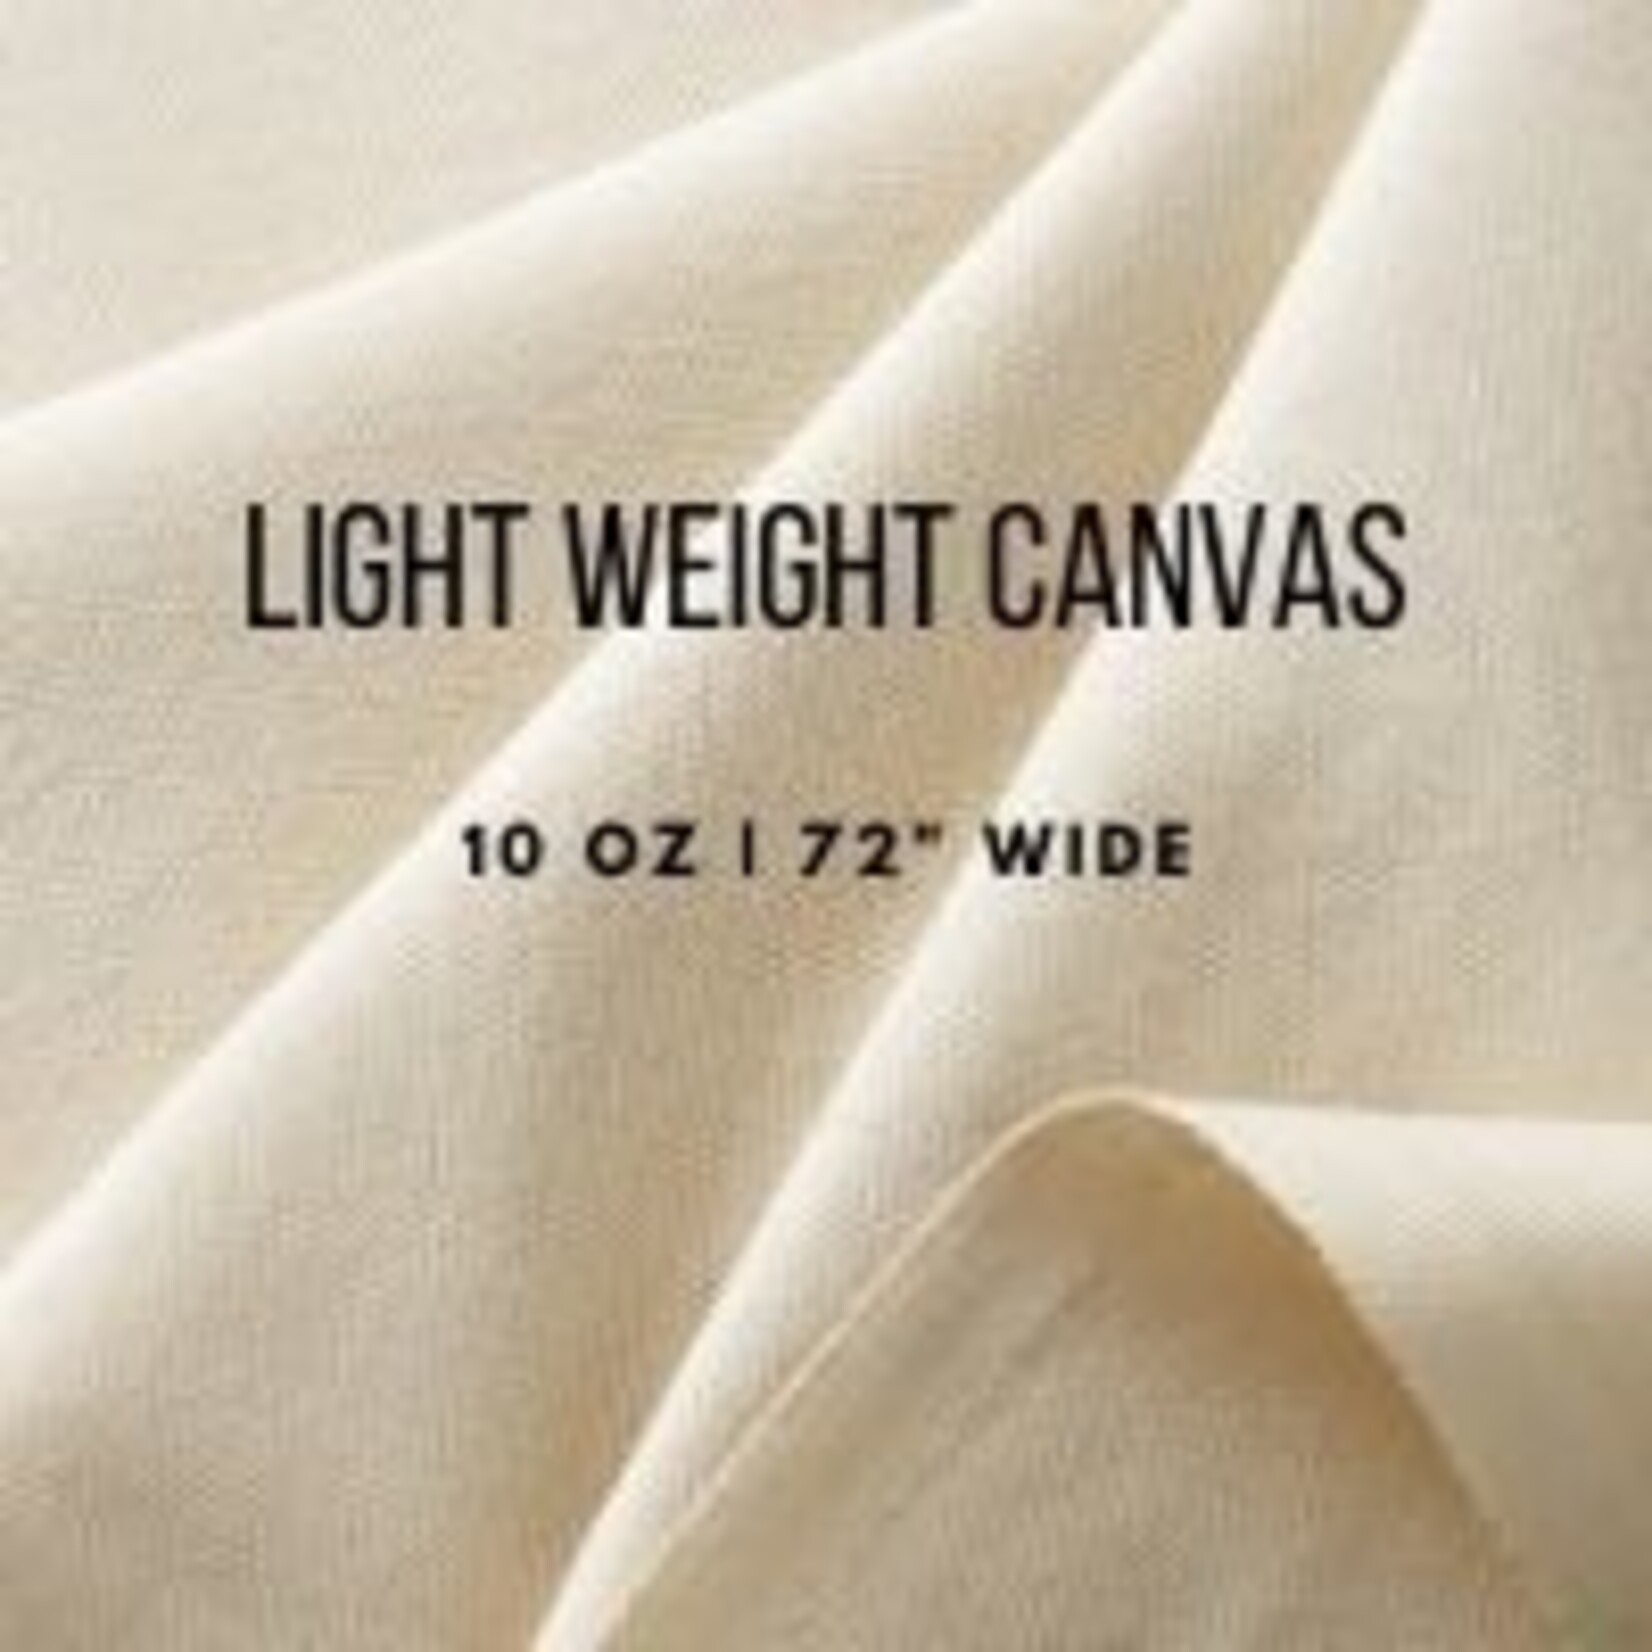 C.R. Daniels Light Weight Canvas 72" 10Oz By The Foot